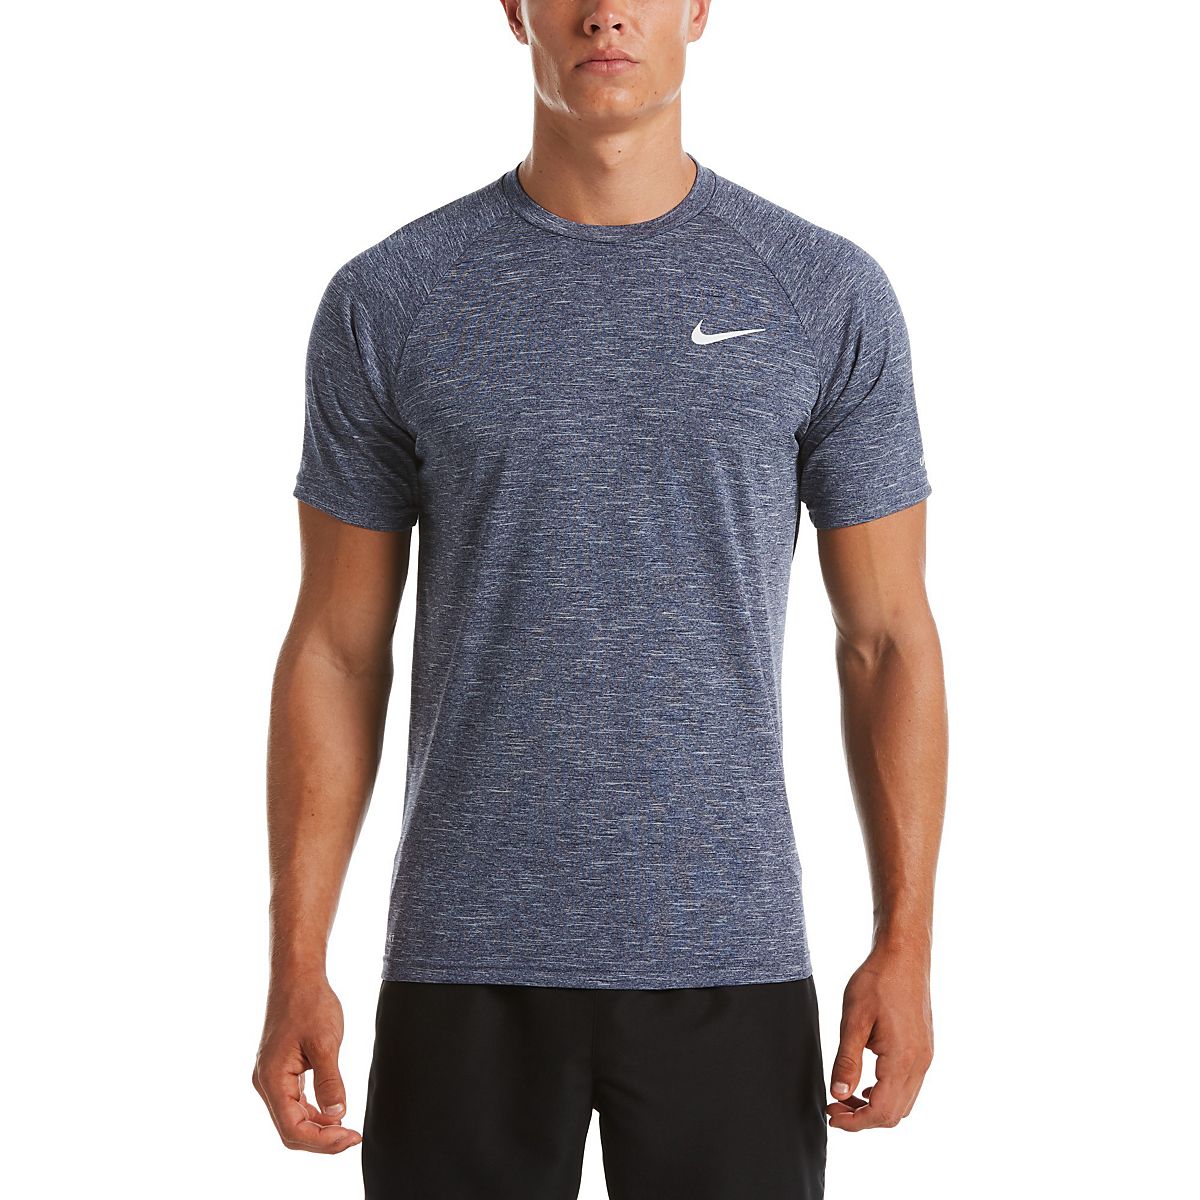 Nike Men's Heather Hydroguard T-shirt | Free Shipping at Academy